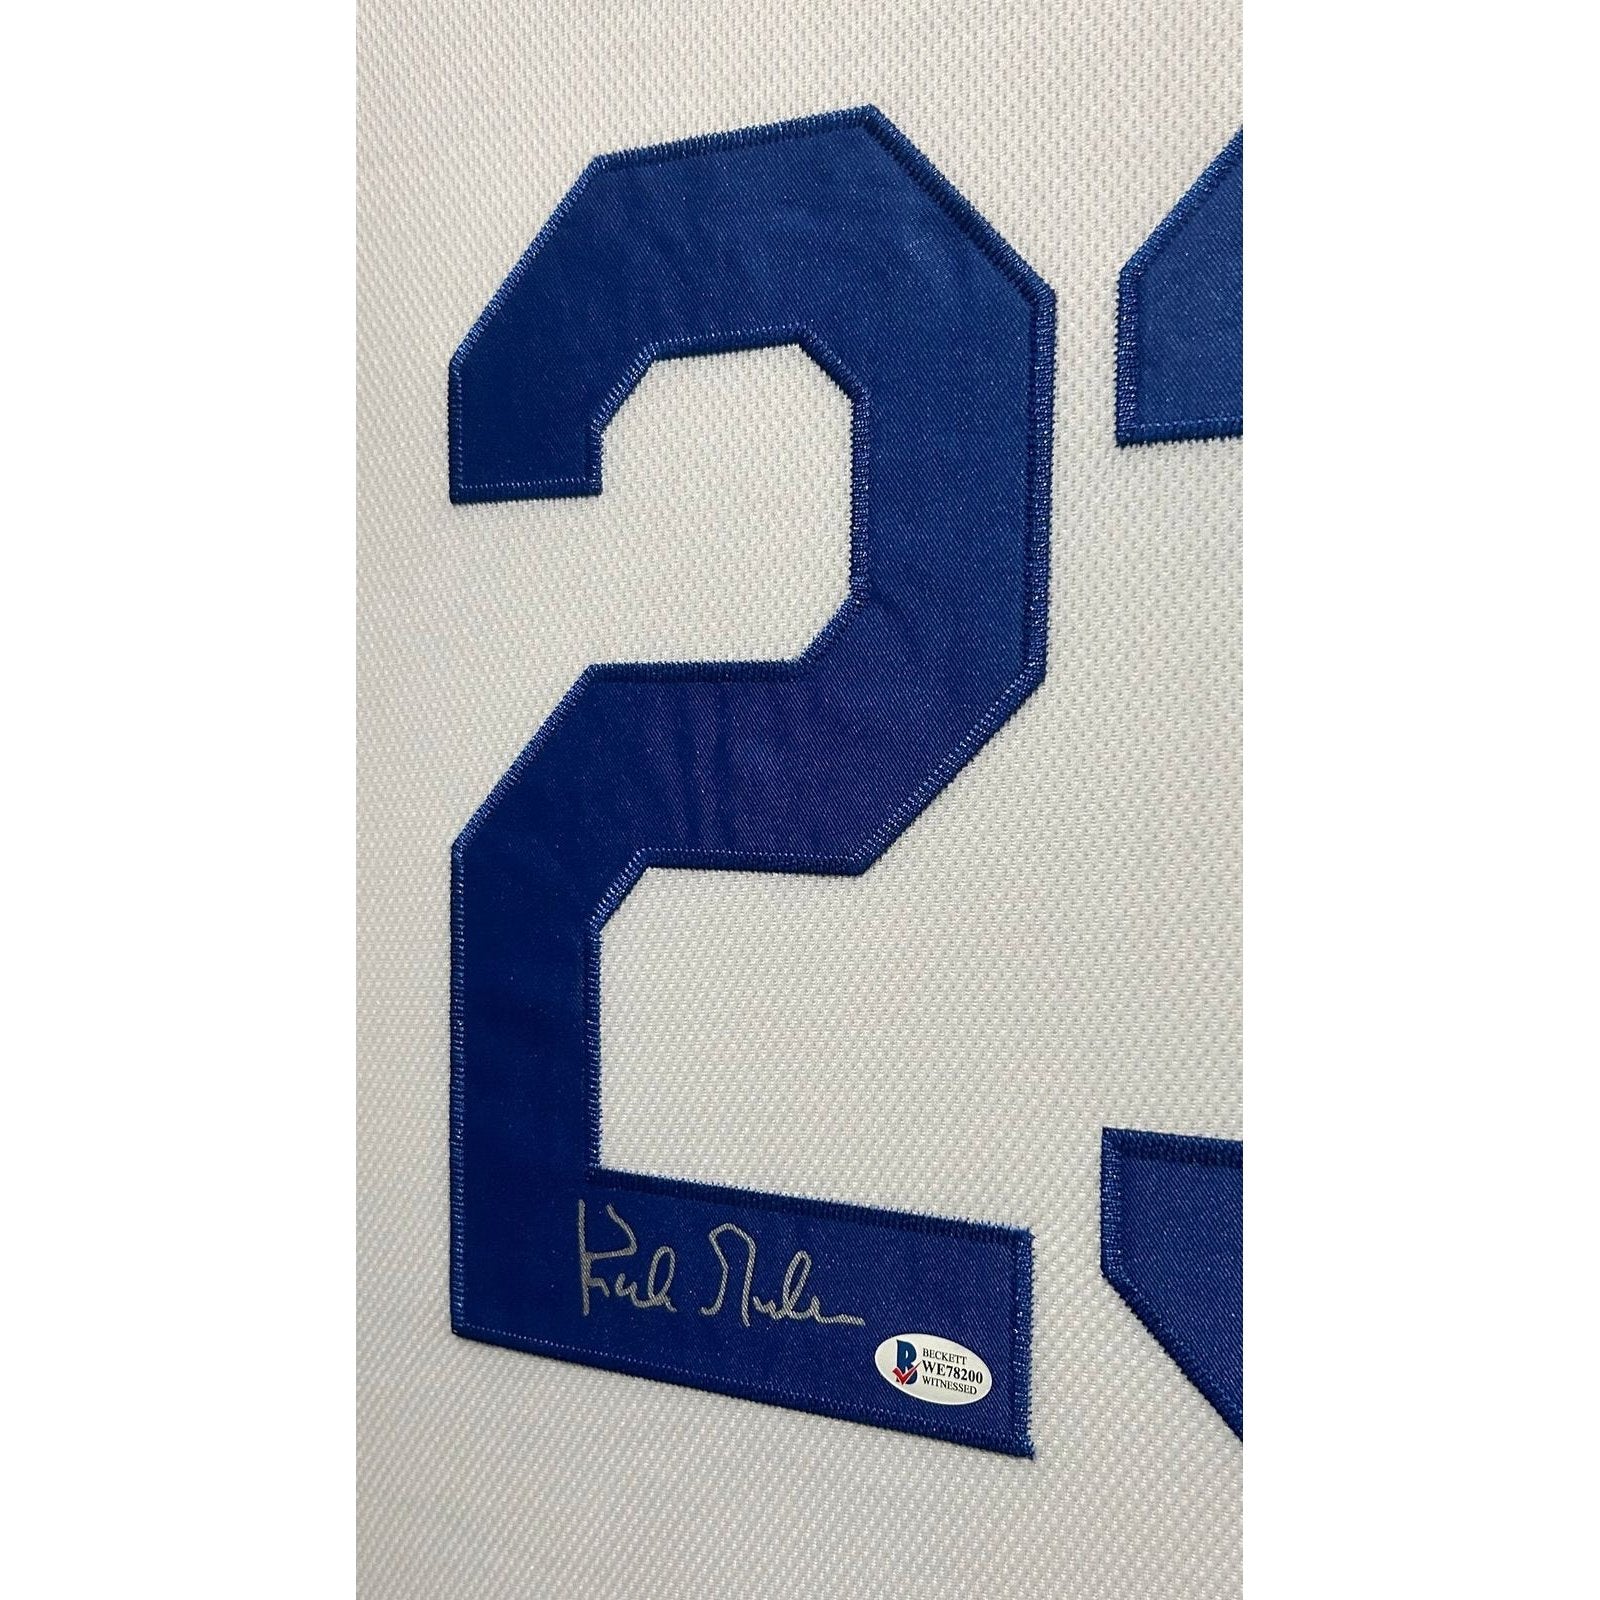 Kirk Gibson Framed Jersey Beckett Autographed Signed Los Angeles Dodgers LA L.A.